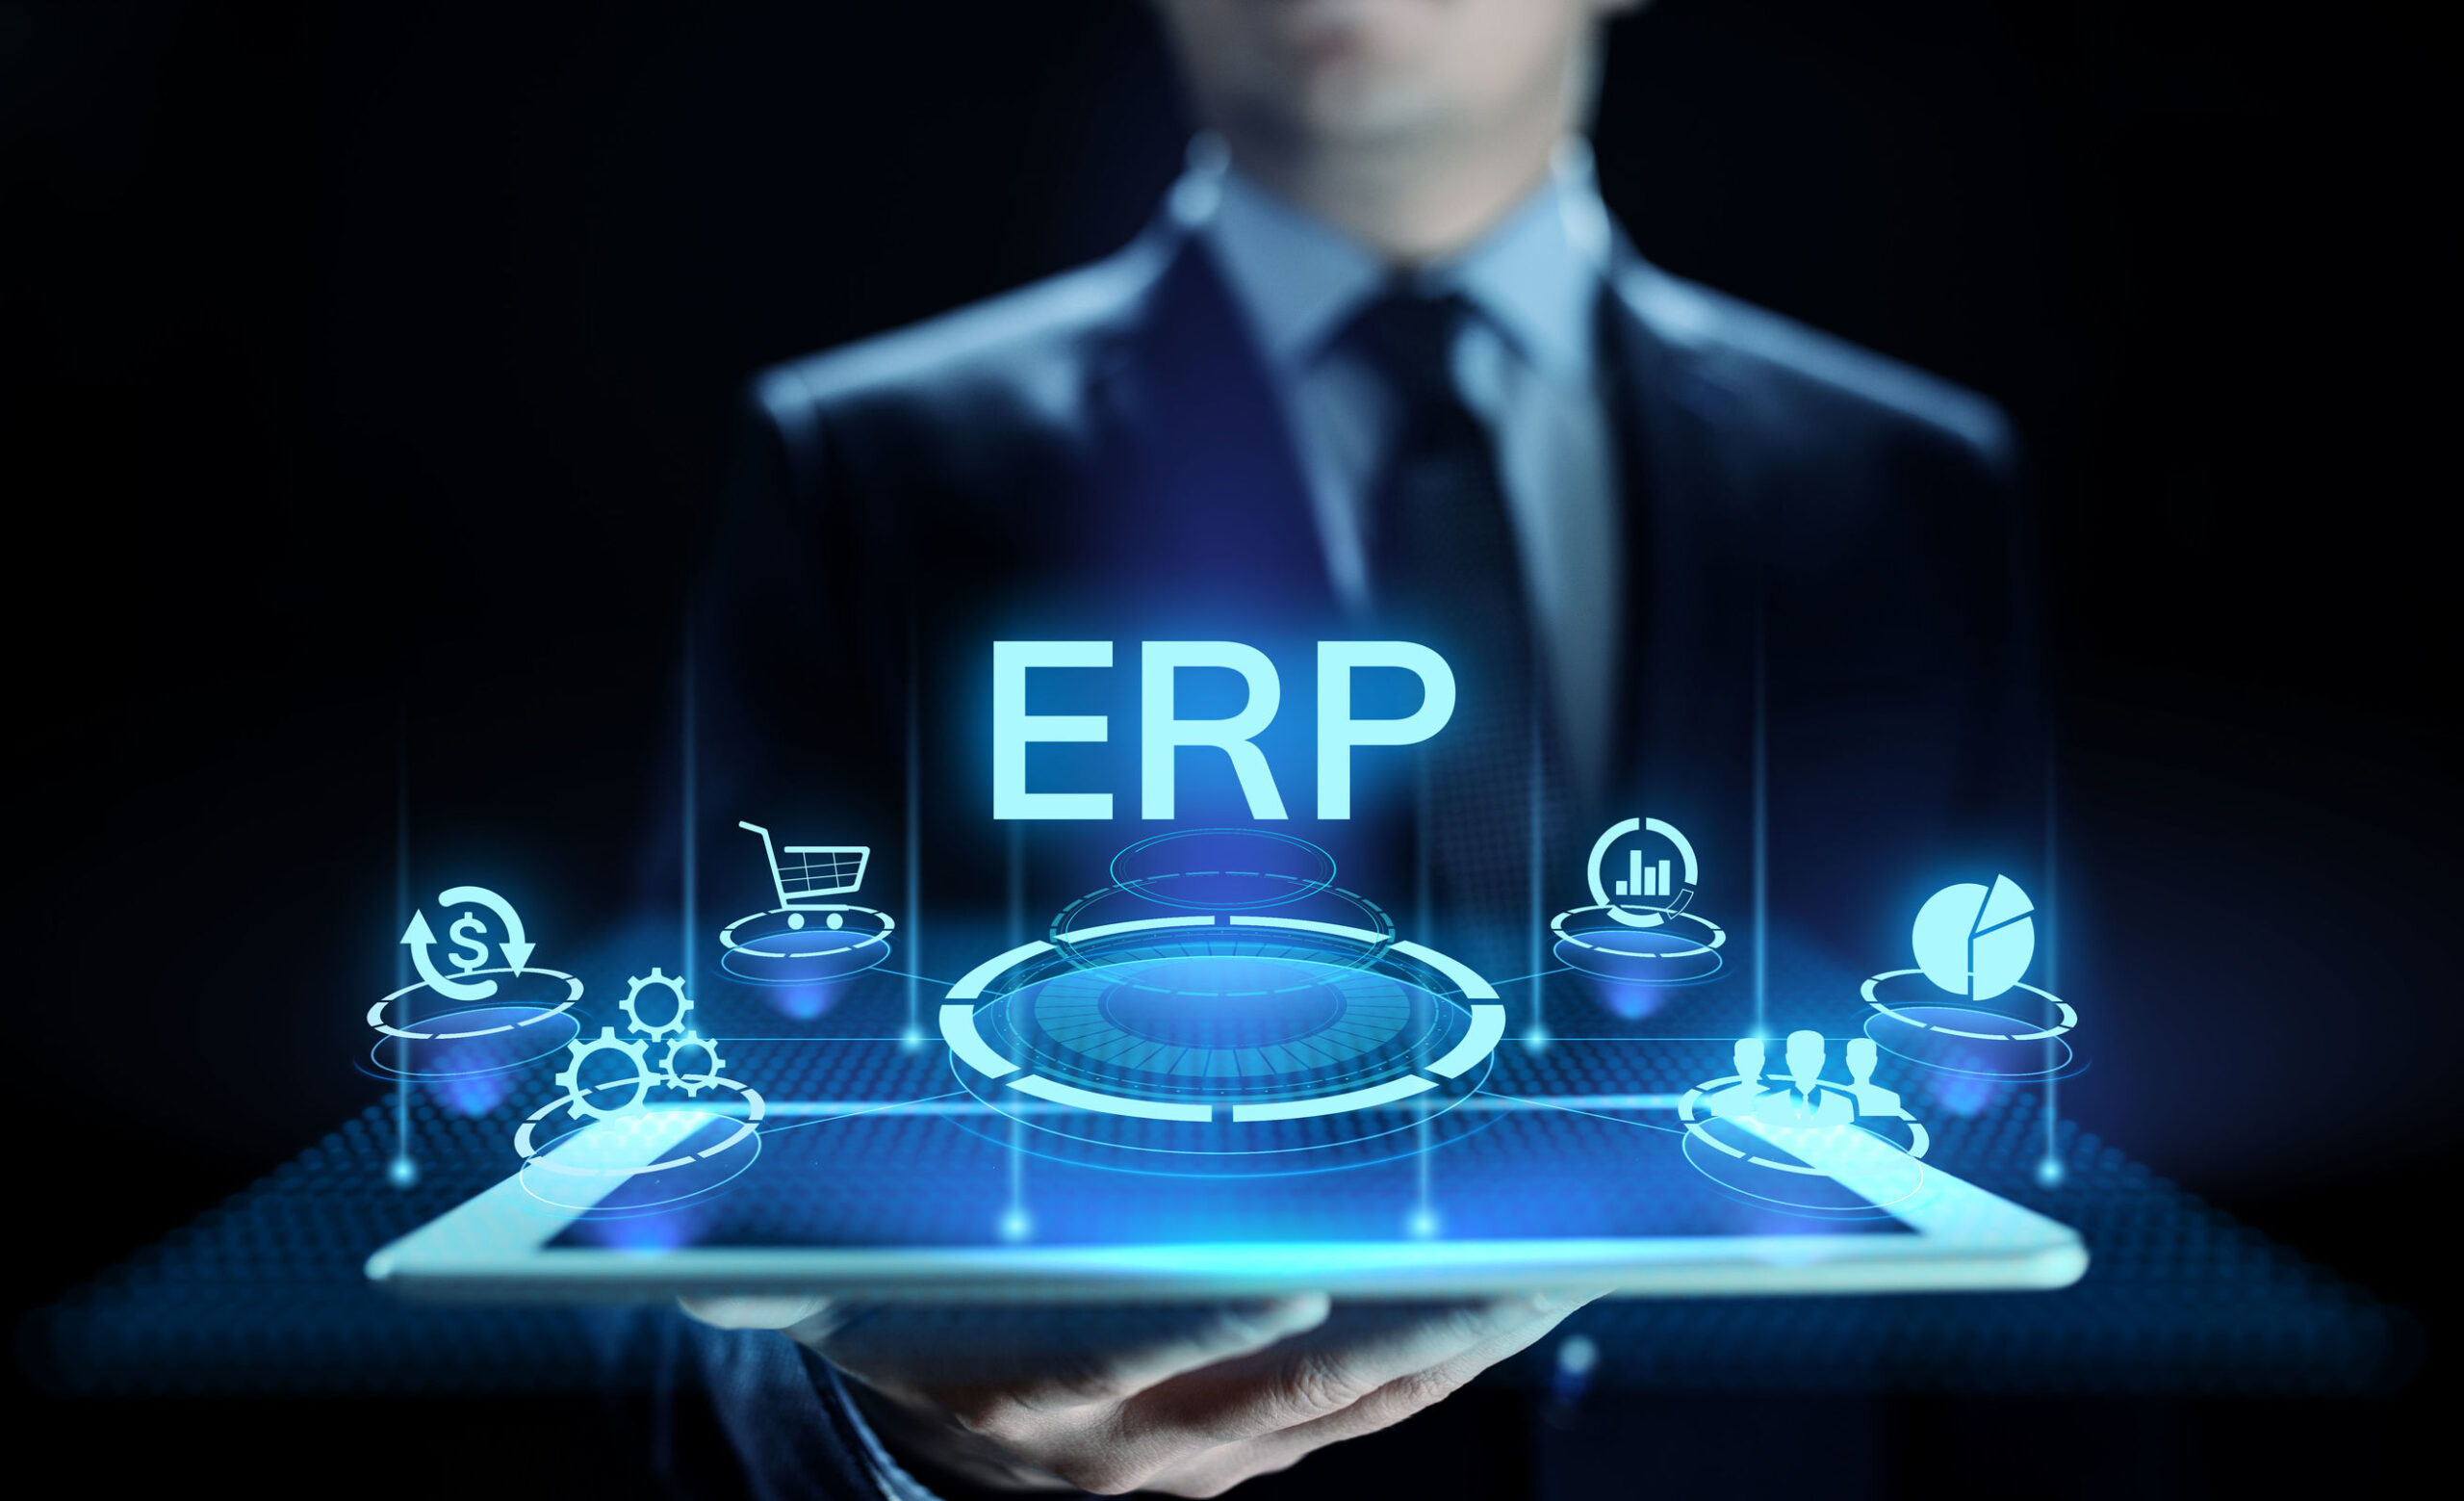 Colleague ERP Software to Power Agile Campuses